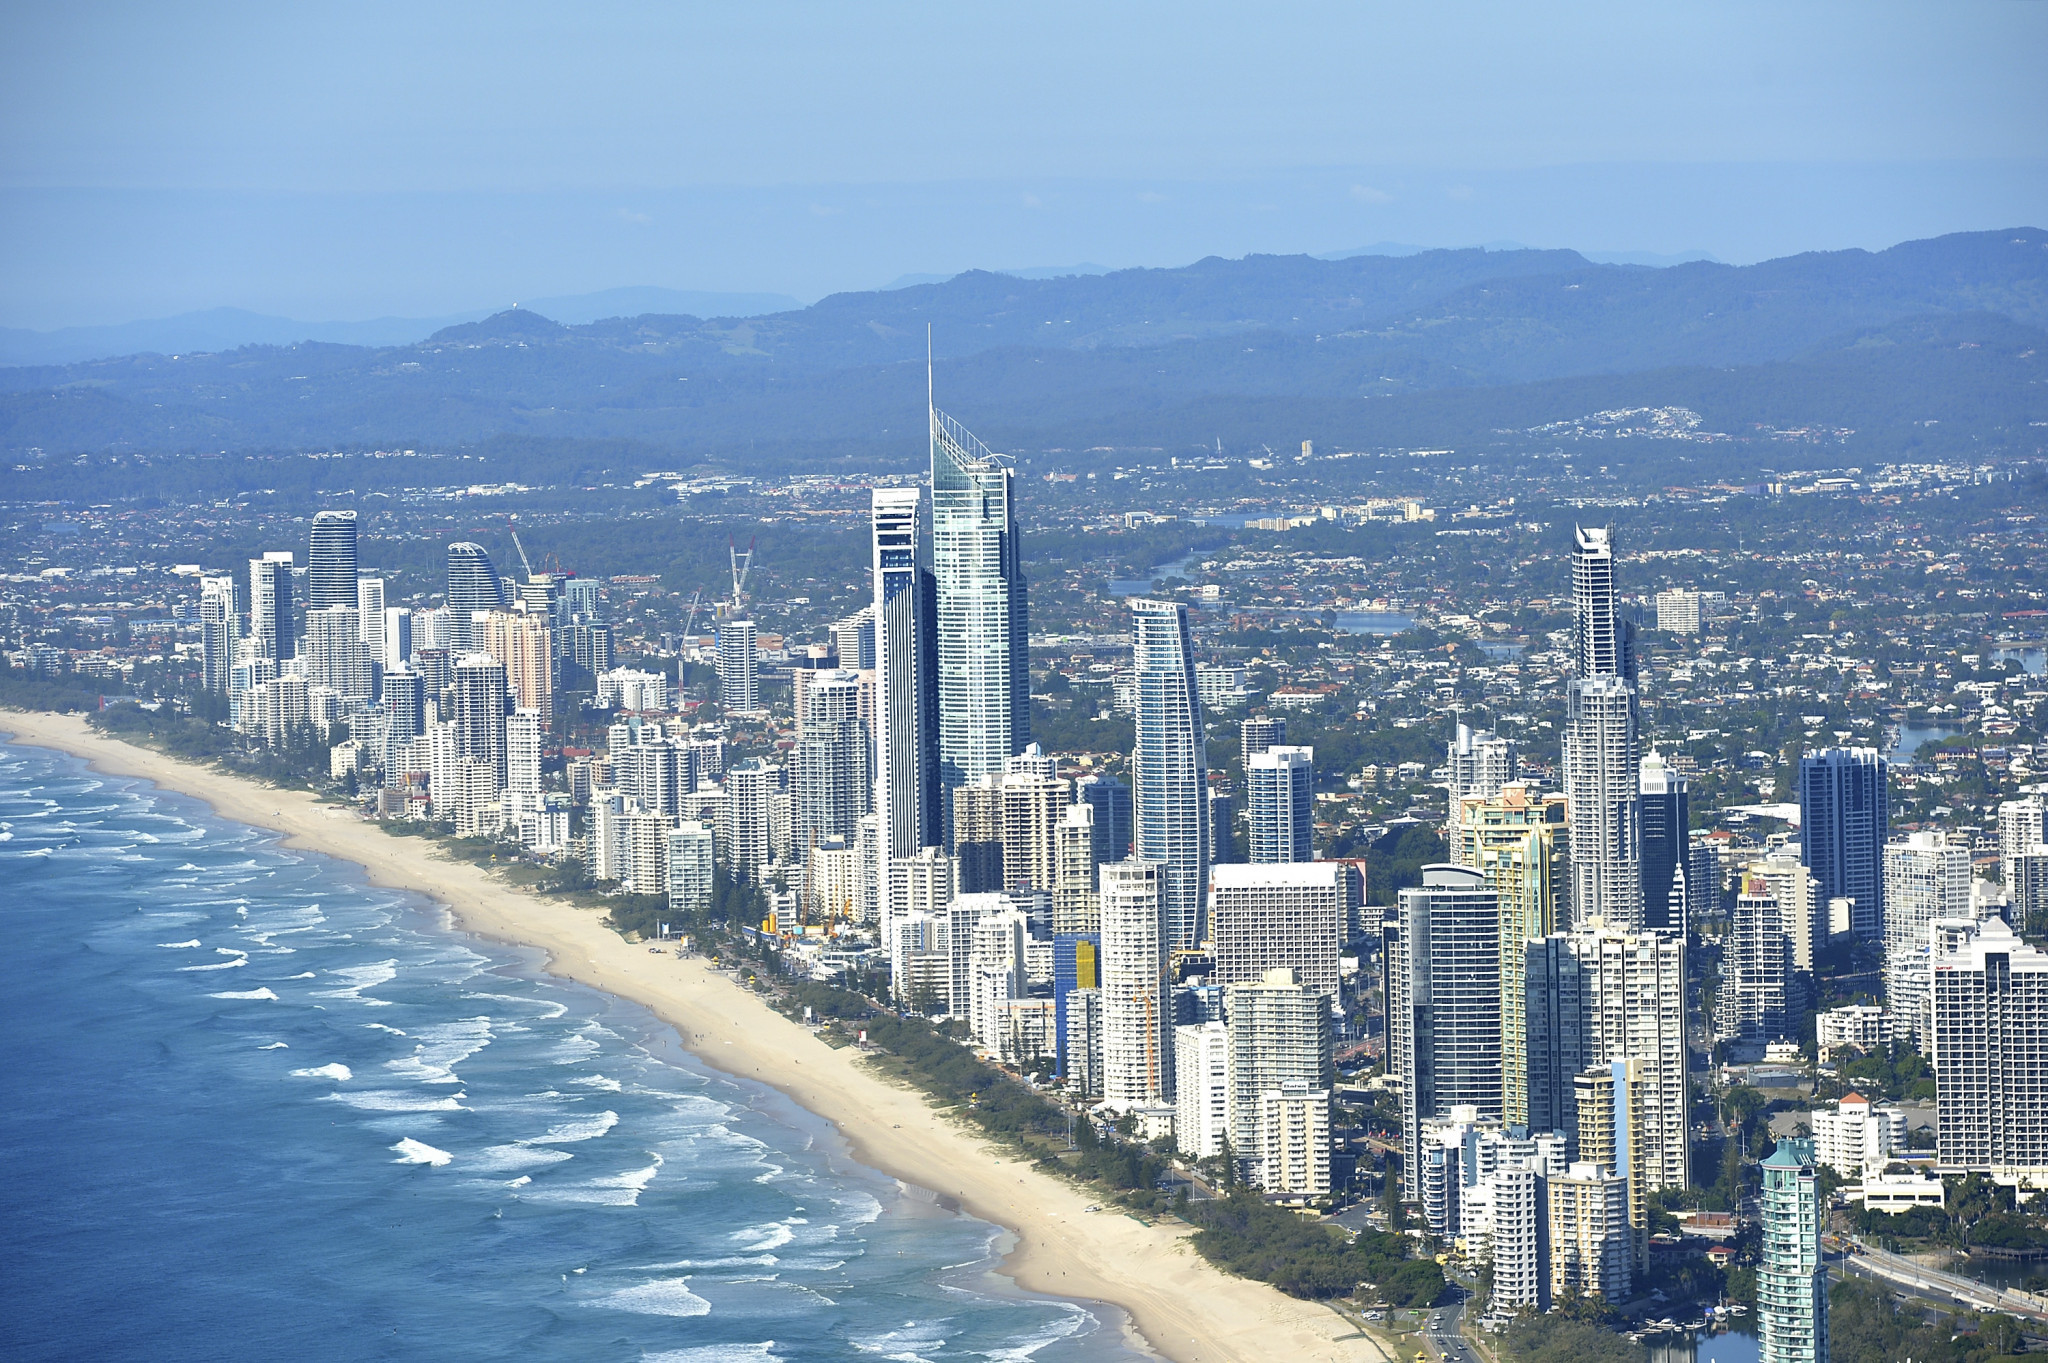 Gold Coast 2018 will feature an equal number of medal events for men and women ©Getty Images